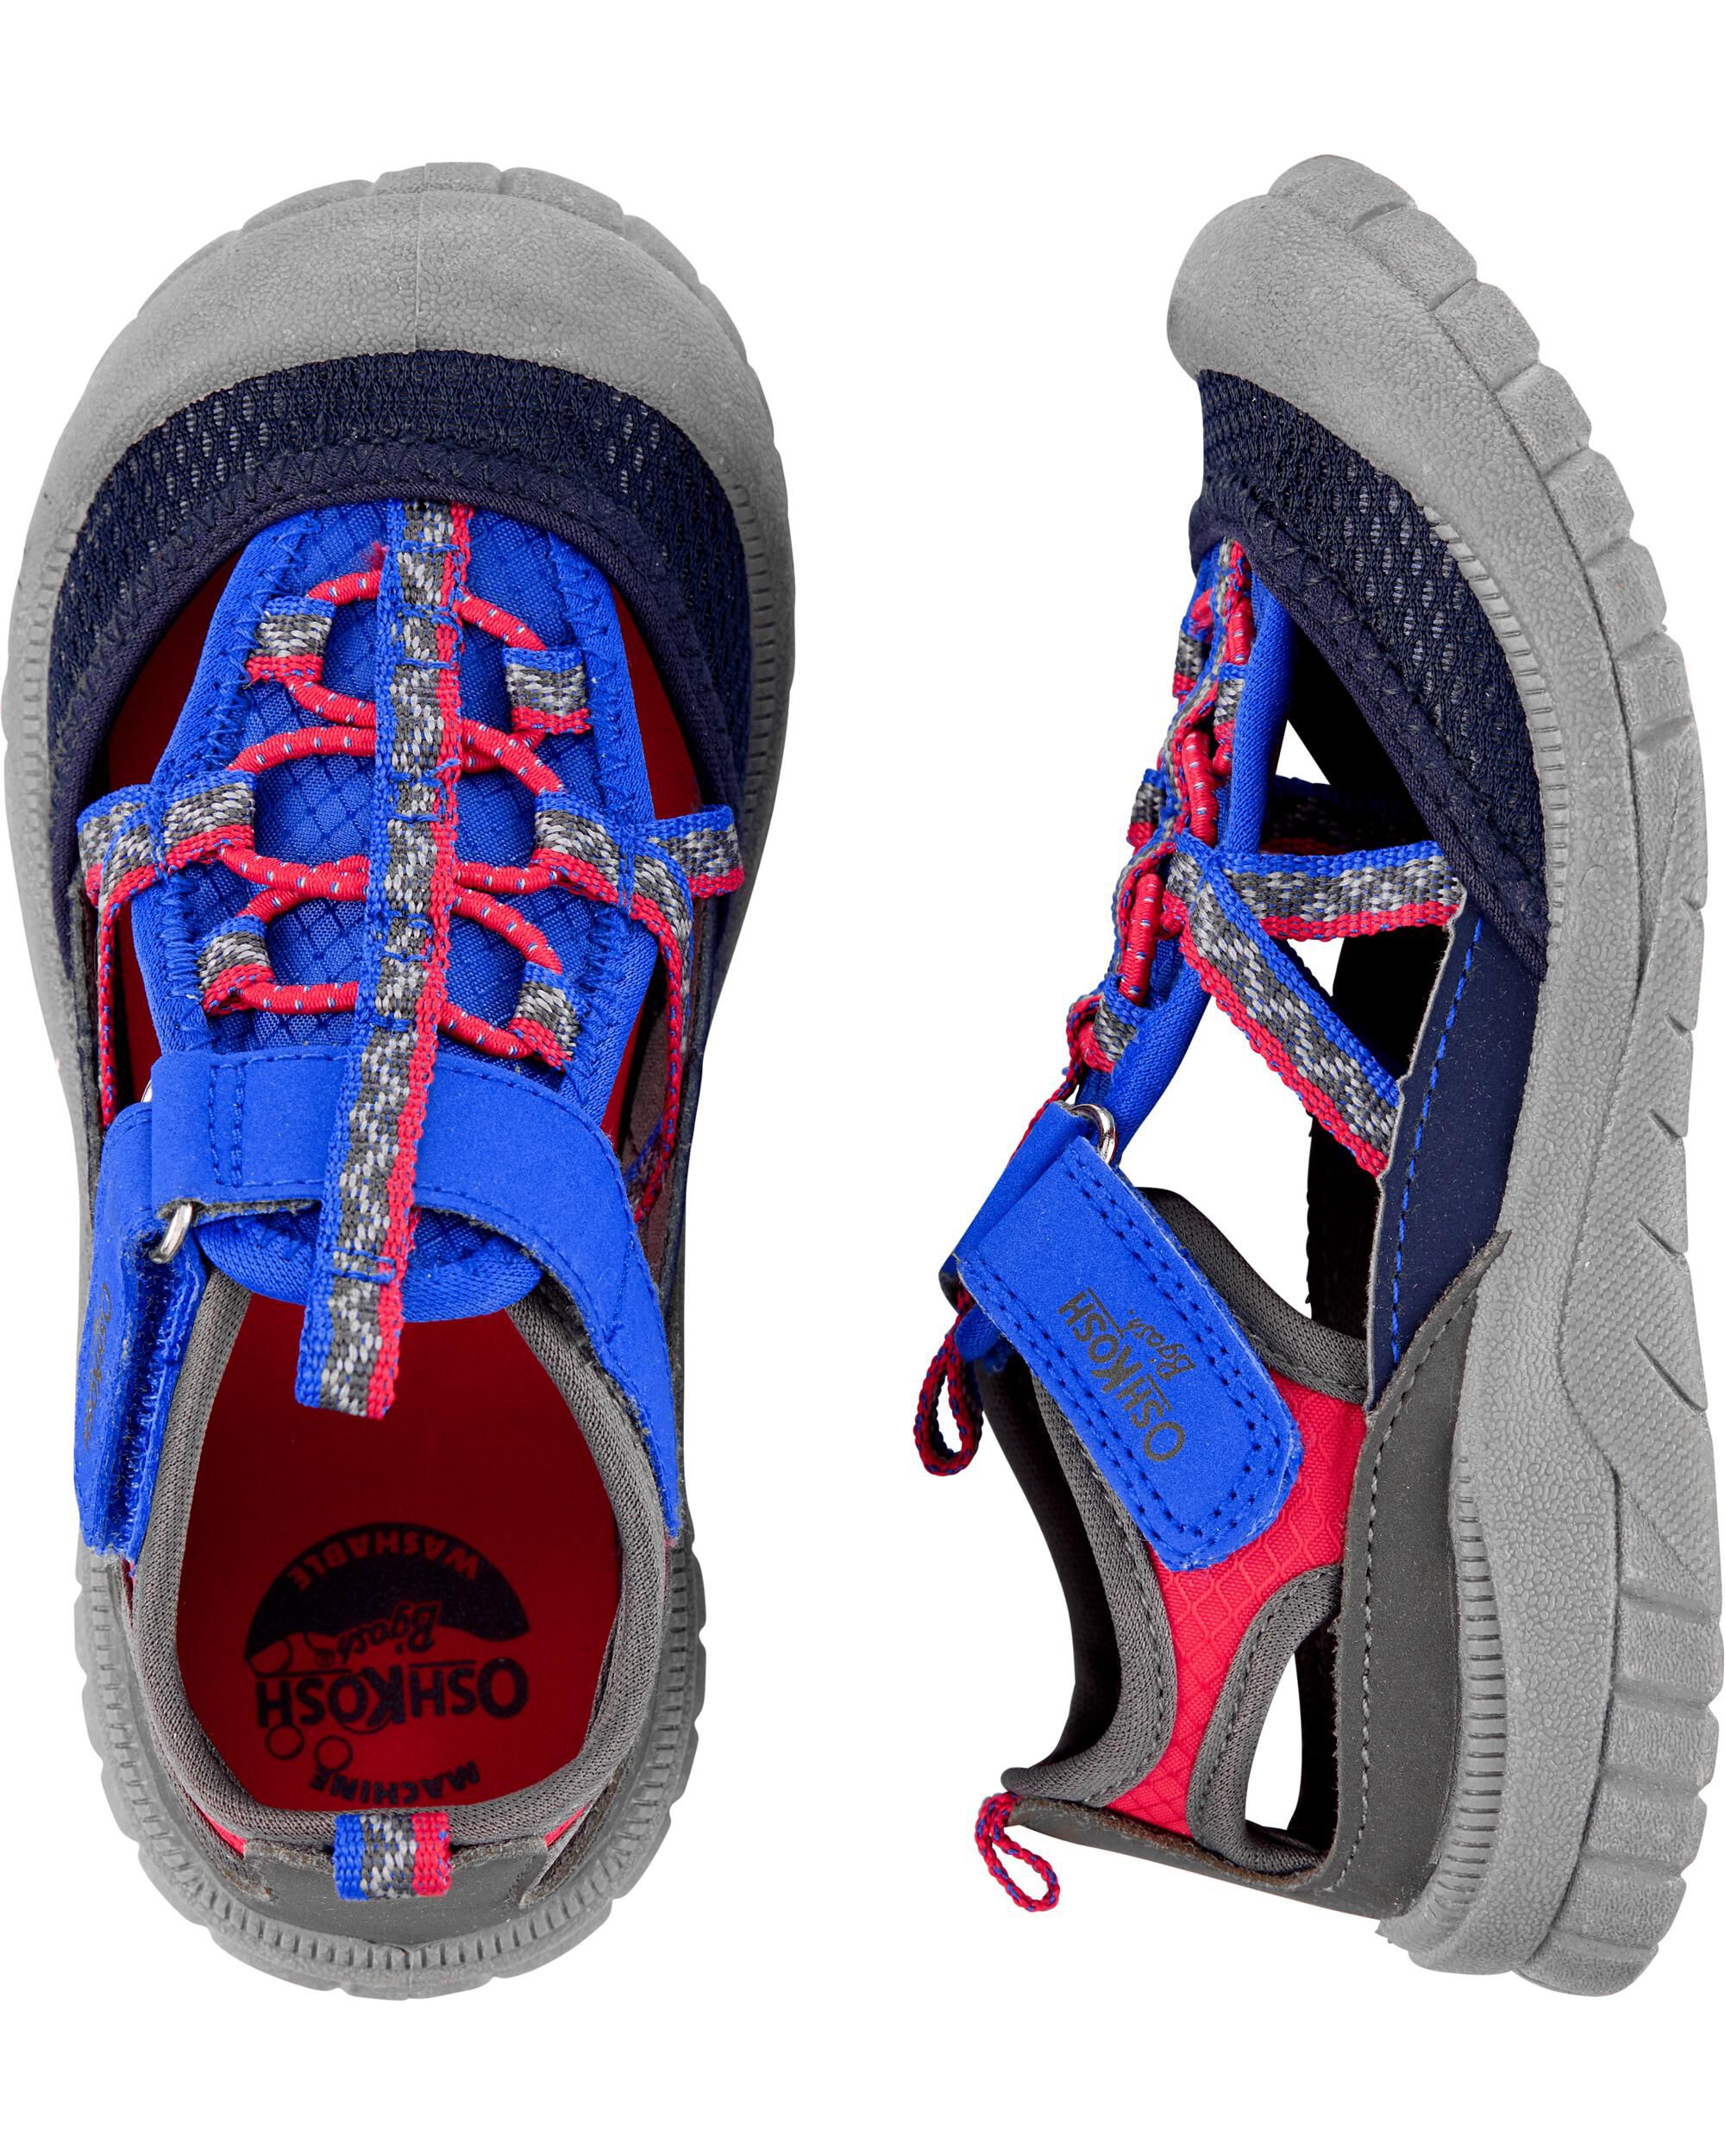 merrell water shoes canada